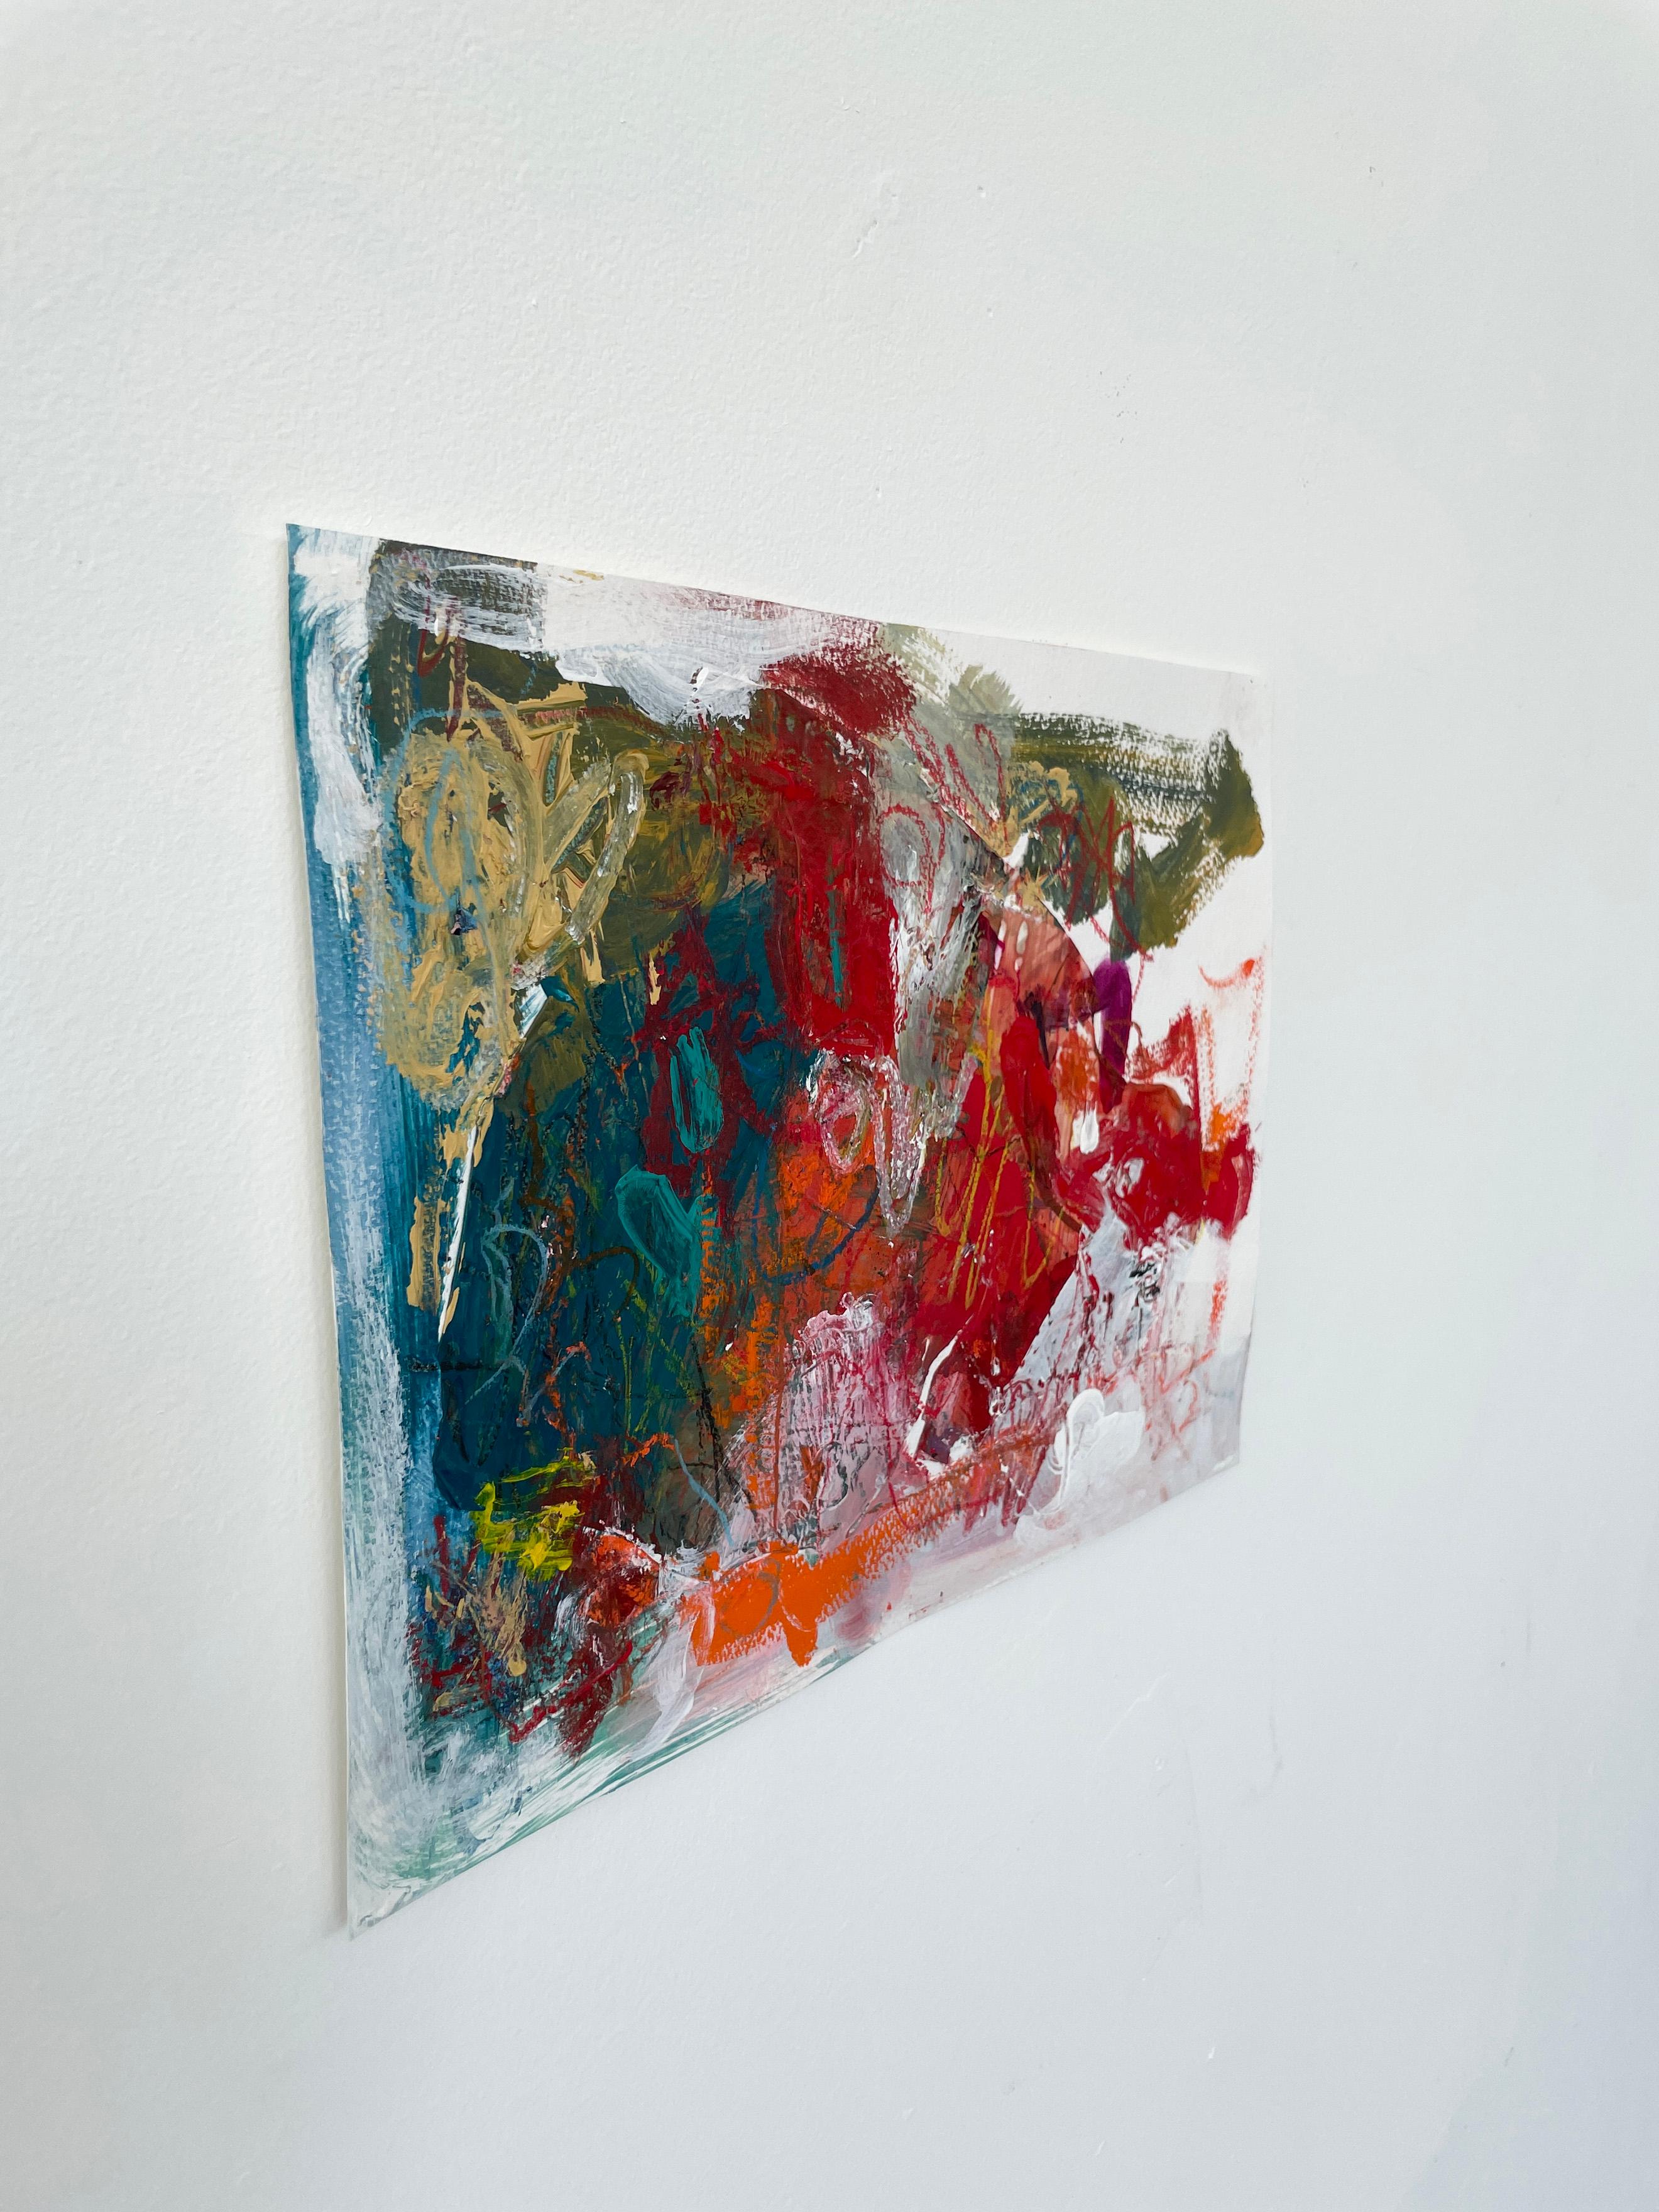 Small Works on Paper, Untitled #10 - Abstract Painting by Stephanie Visser 